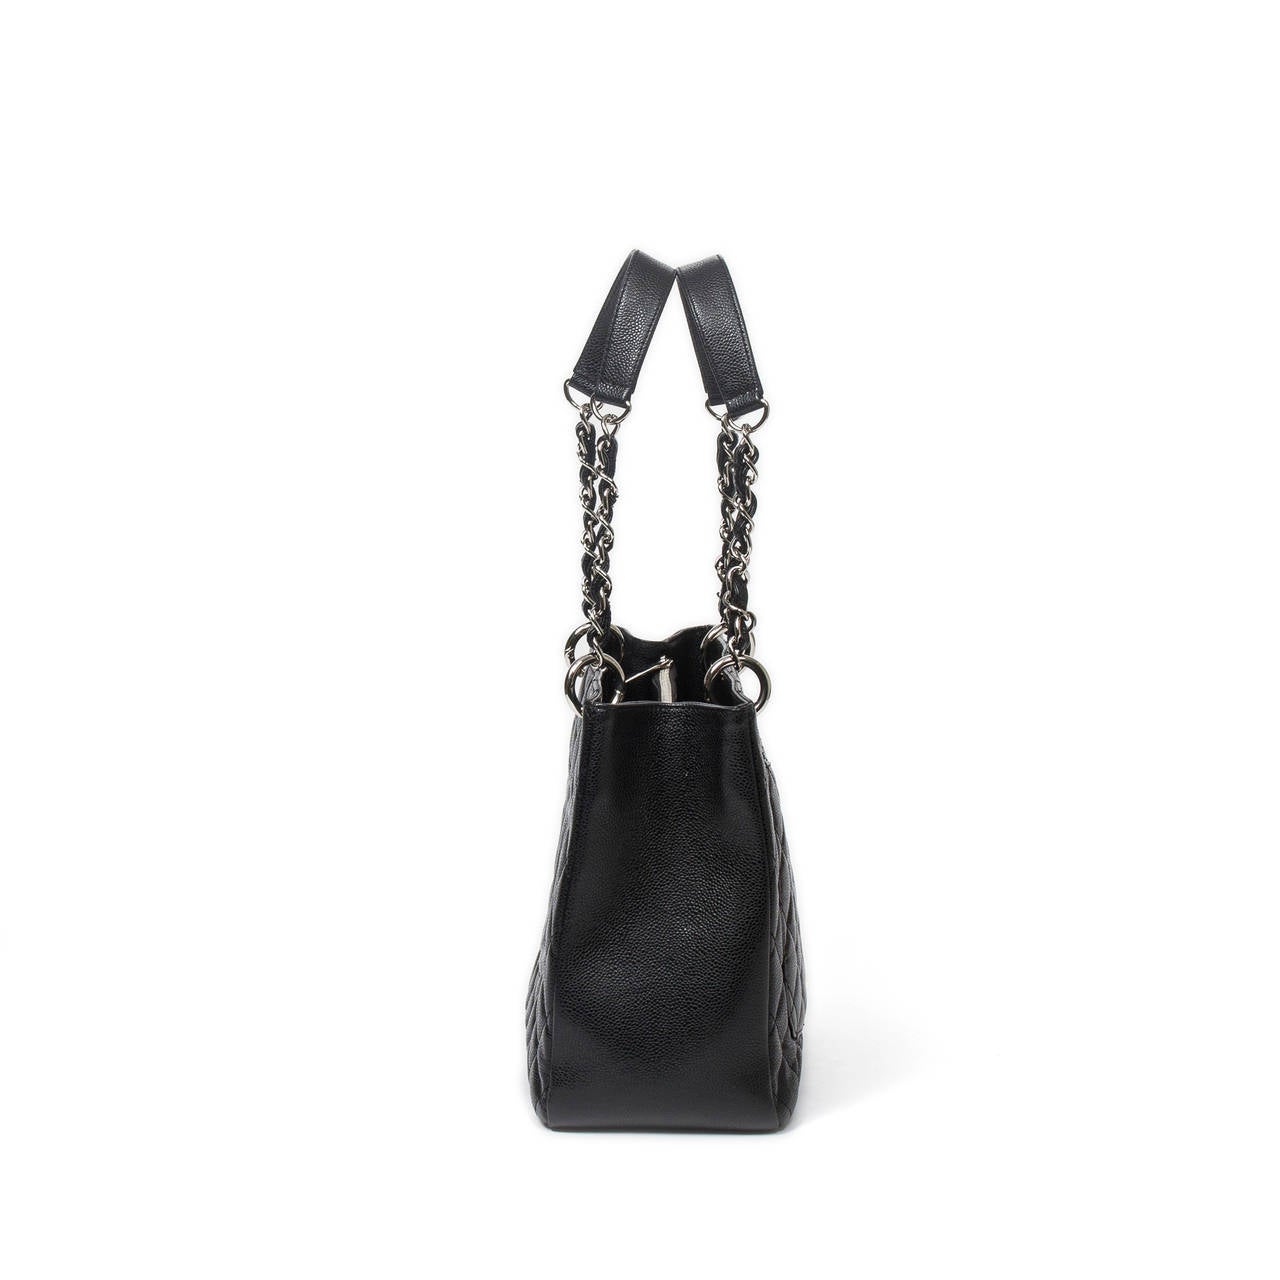 Chanel Gran Tote MM Shopper Black Grained Leather In Excellent Condition For Sale In Dublin, IE